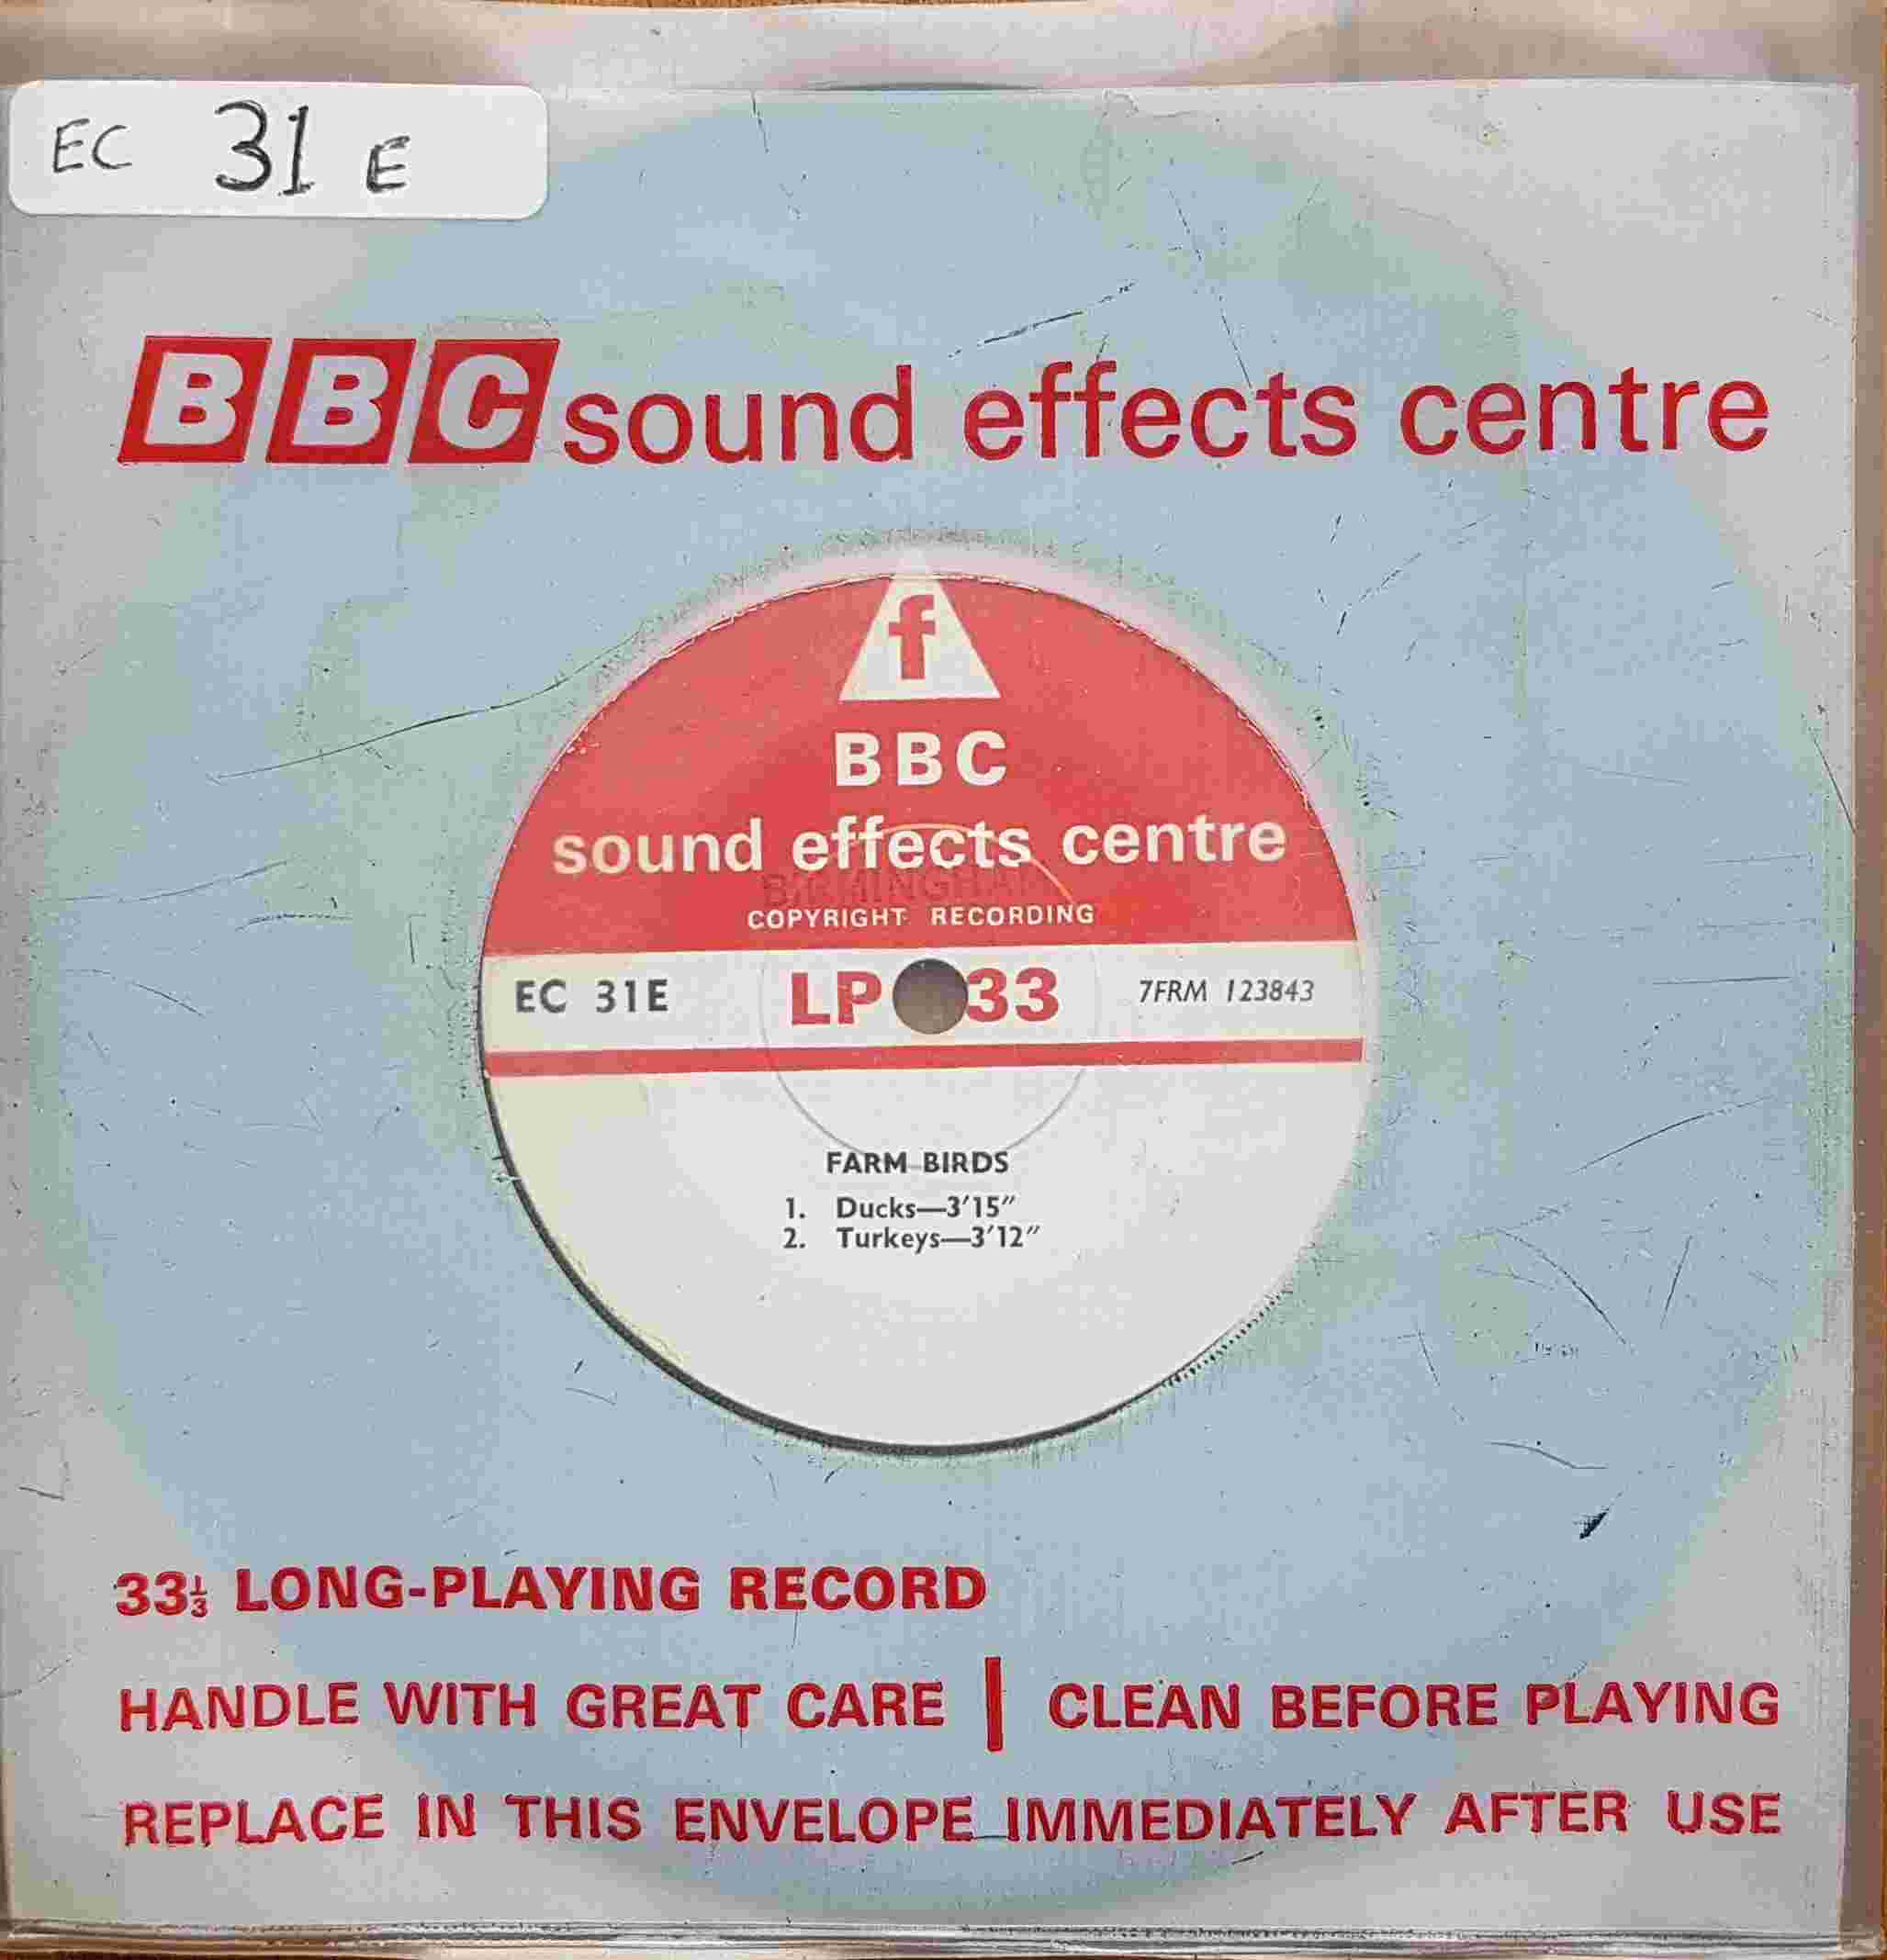 Picture of EC 31E Farm birds by artist Not registered from the BBC singles - Records and Tapes library